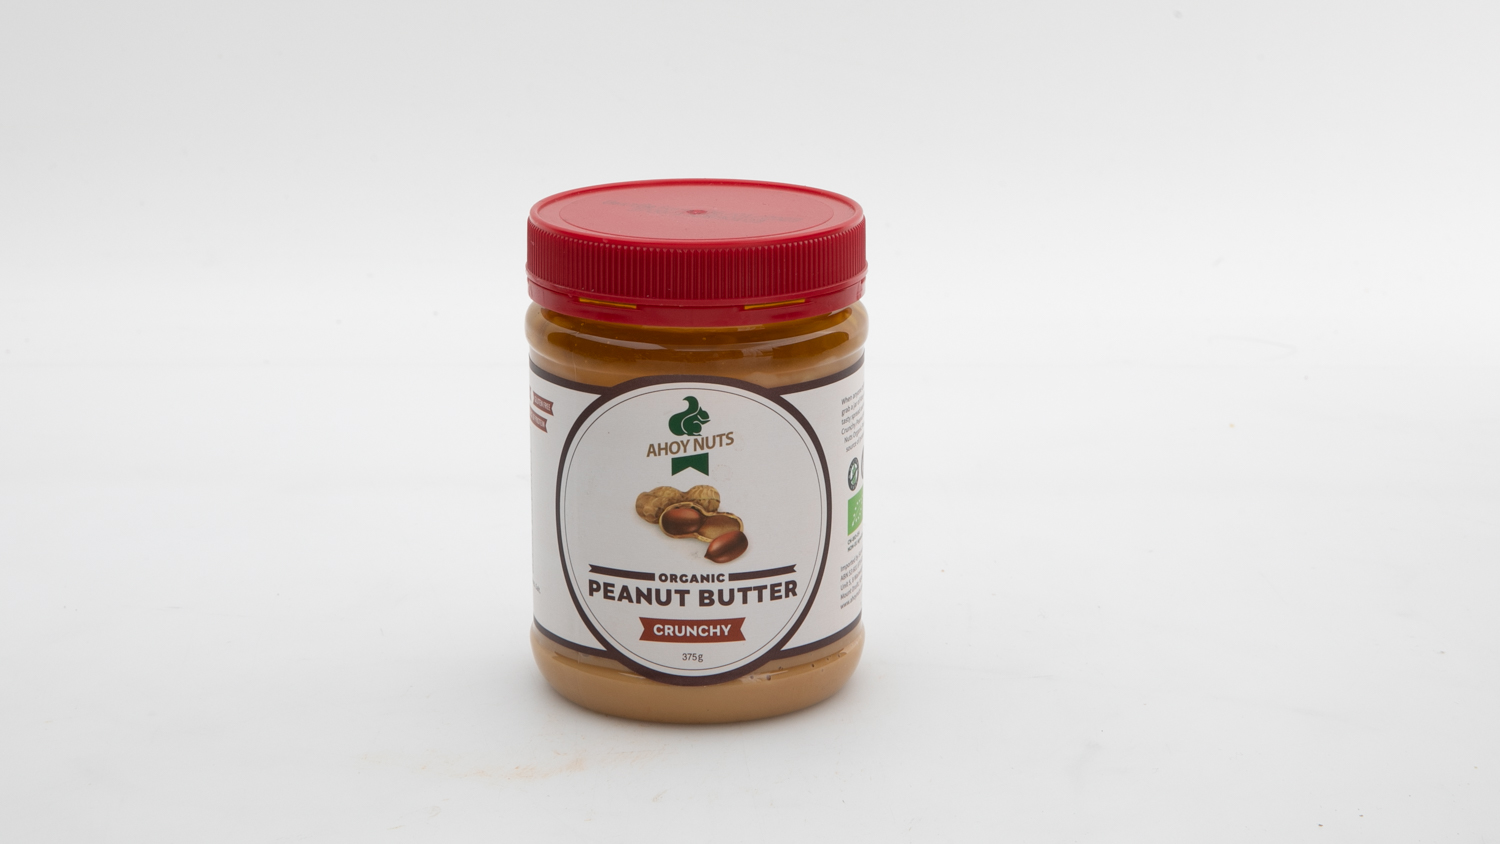 Ahoy Nuts Organic Peanut Butter Crunchy carousel image